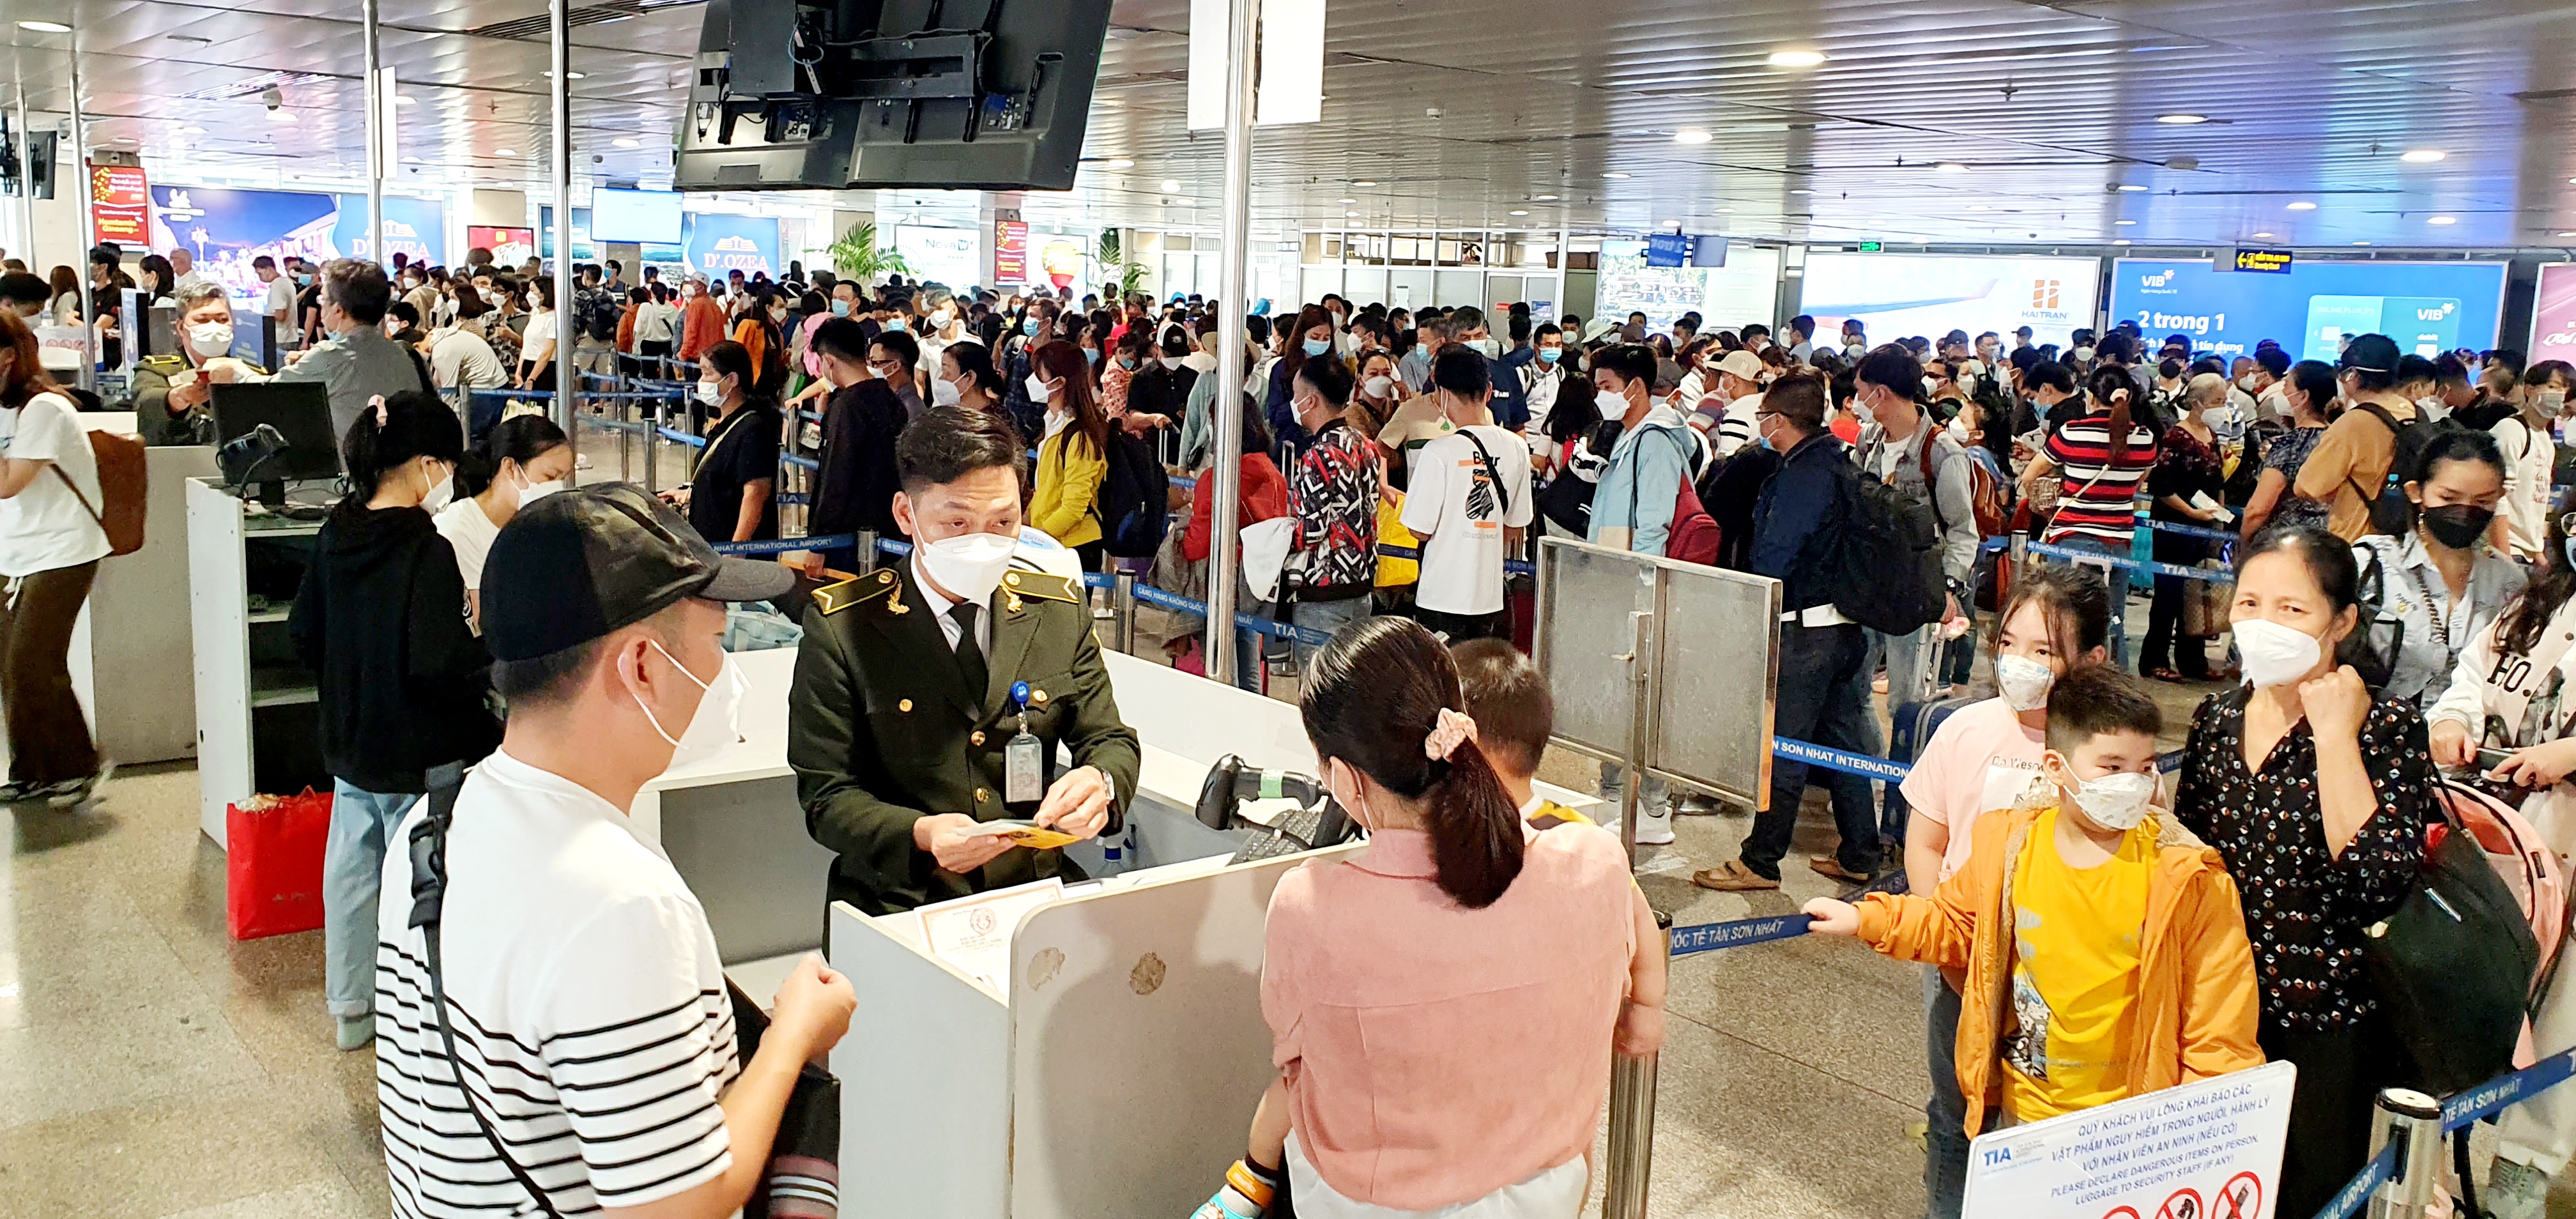 Passengers go through the security check area at Tan Son Nhat International Airport in Ho Chi Minh City, January 23, 2022. Photo: Cong Trung / Tuoi Tre